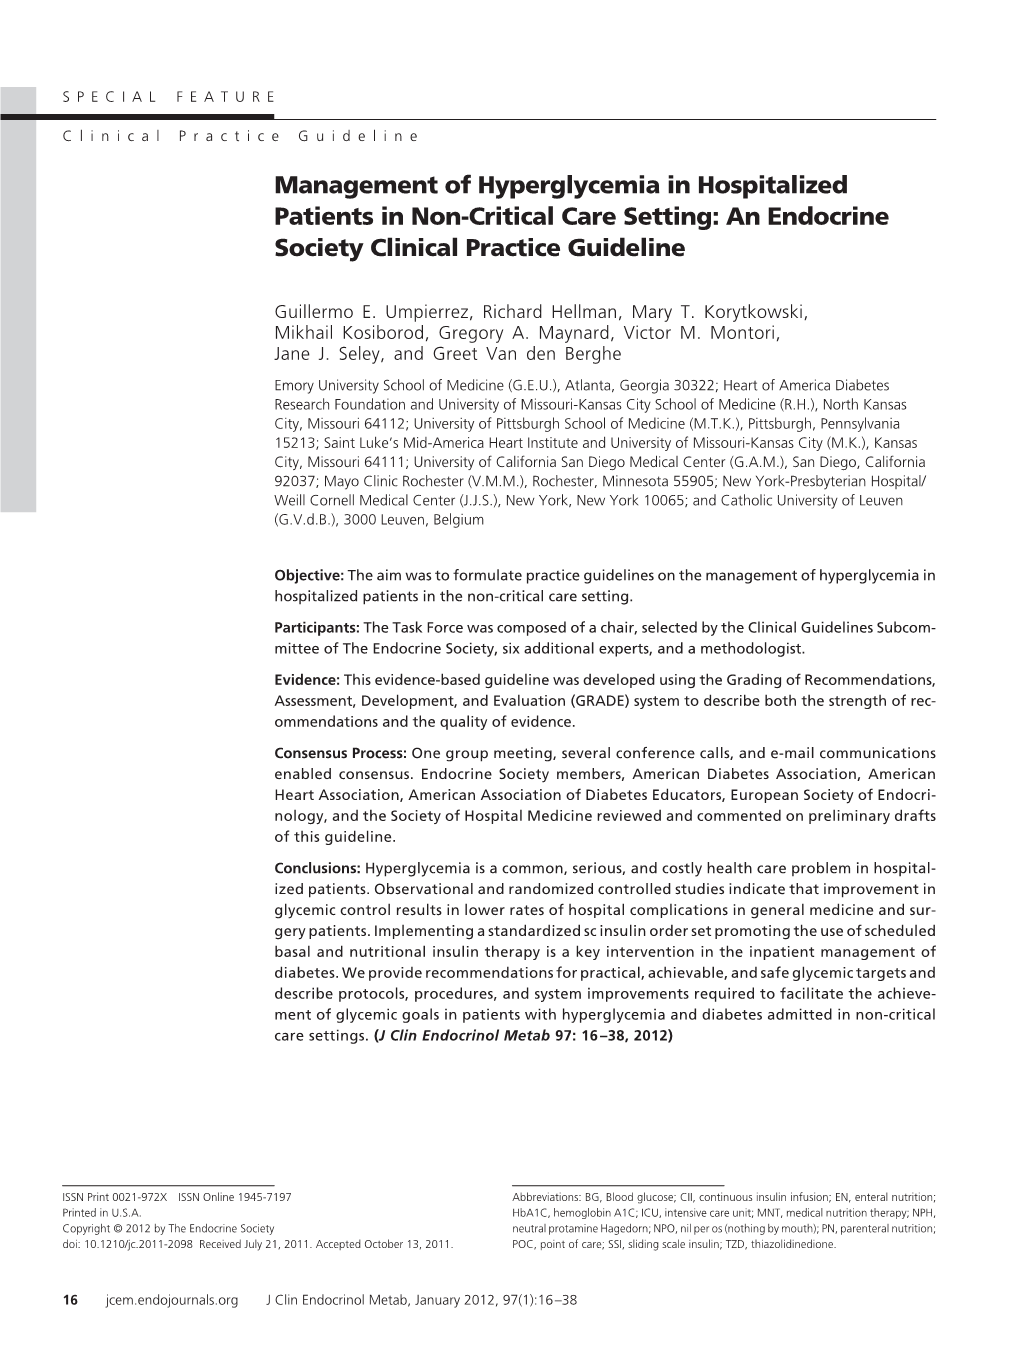 Management of Hyperglycemia in Hospitalized Patients in Non-Critical Care Setting: an Endocrine Society Clinical Practice Guideline